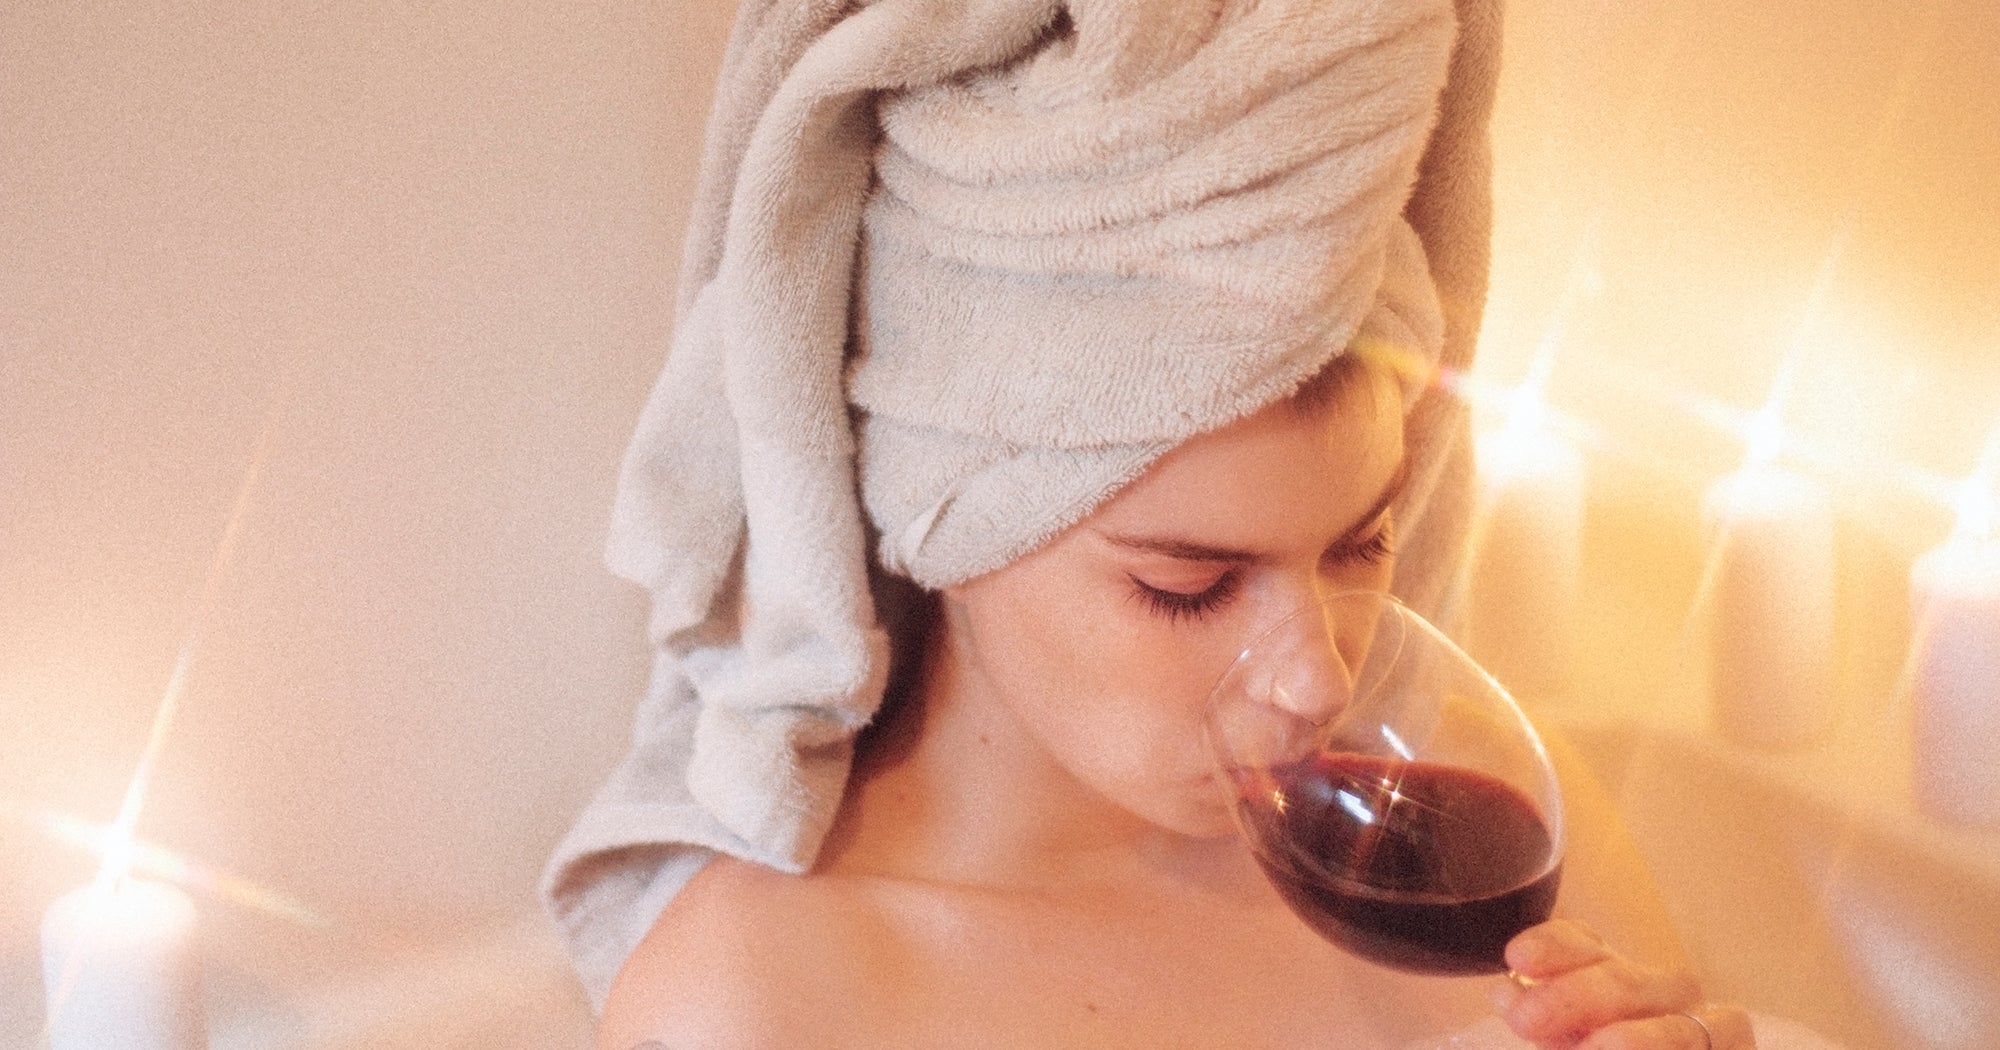 What Is Healthiest Wine For Women To Drink